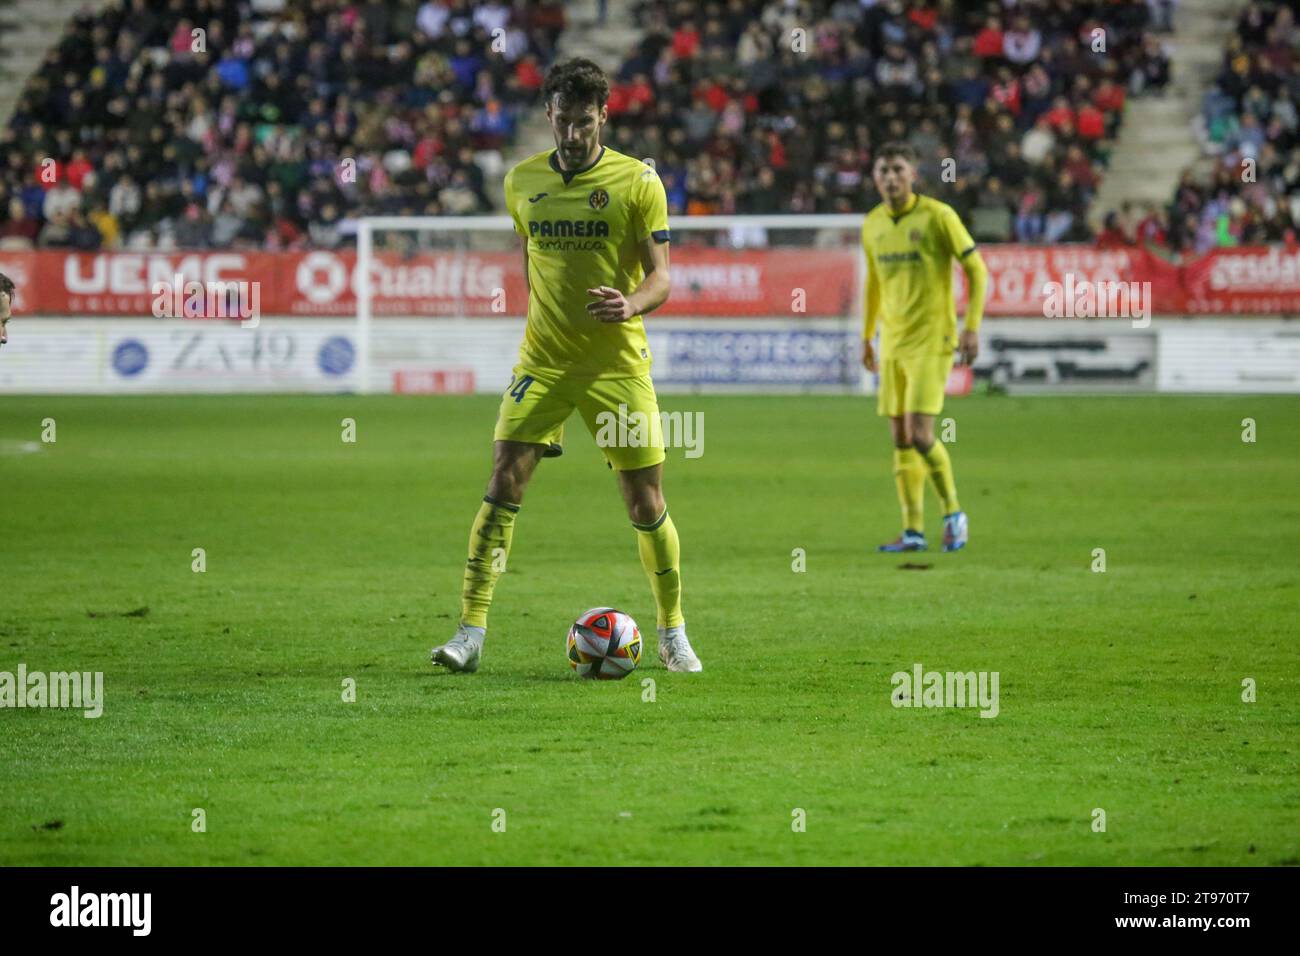 Zamora, Spain. 22nd Nov, 2023. Villarreal CF's player, Alfredo Pedraza (24) with the ball during the Second round of the SM El Rey Cup 2023-24 between Zamora CF and Villarreal CF, on November 22 of 2023, at the Ruta de la Plata Stadium, in Zamora, Spain. (Photo by Alberto Brevers/Pacific Press) Credit: Pacific Press Media Production Corp./Alamy Live News Stock Photo